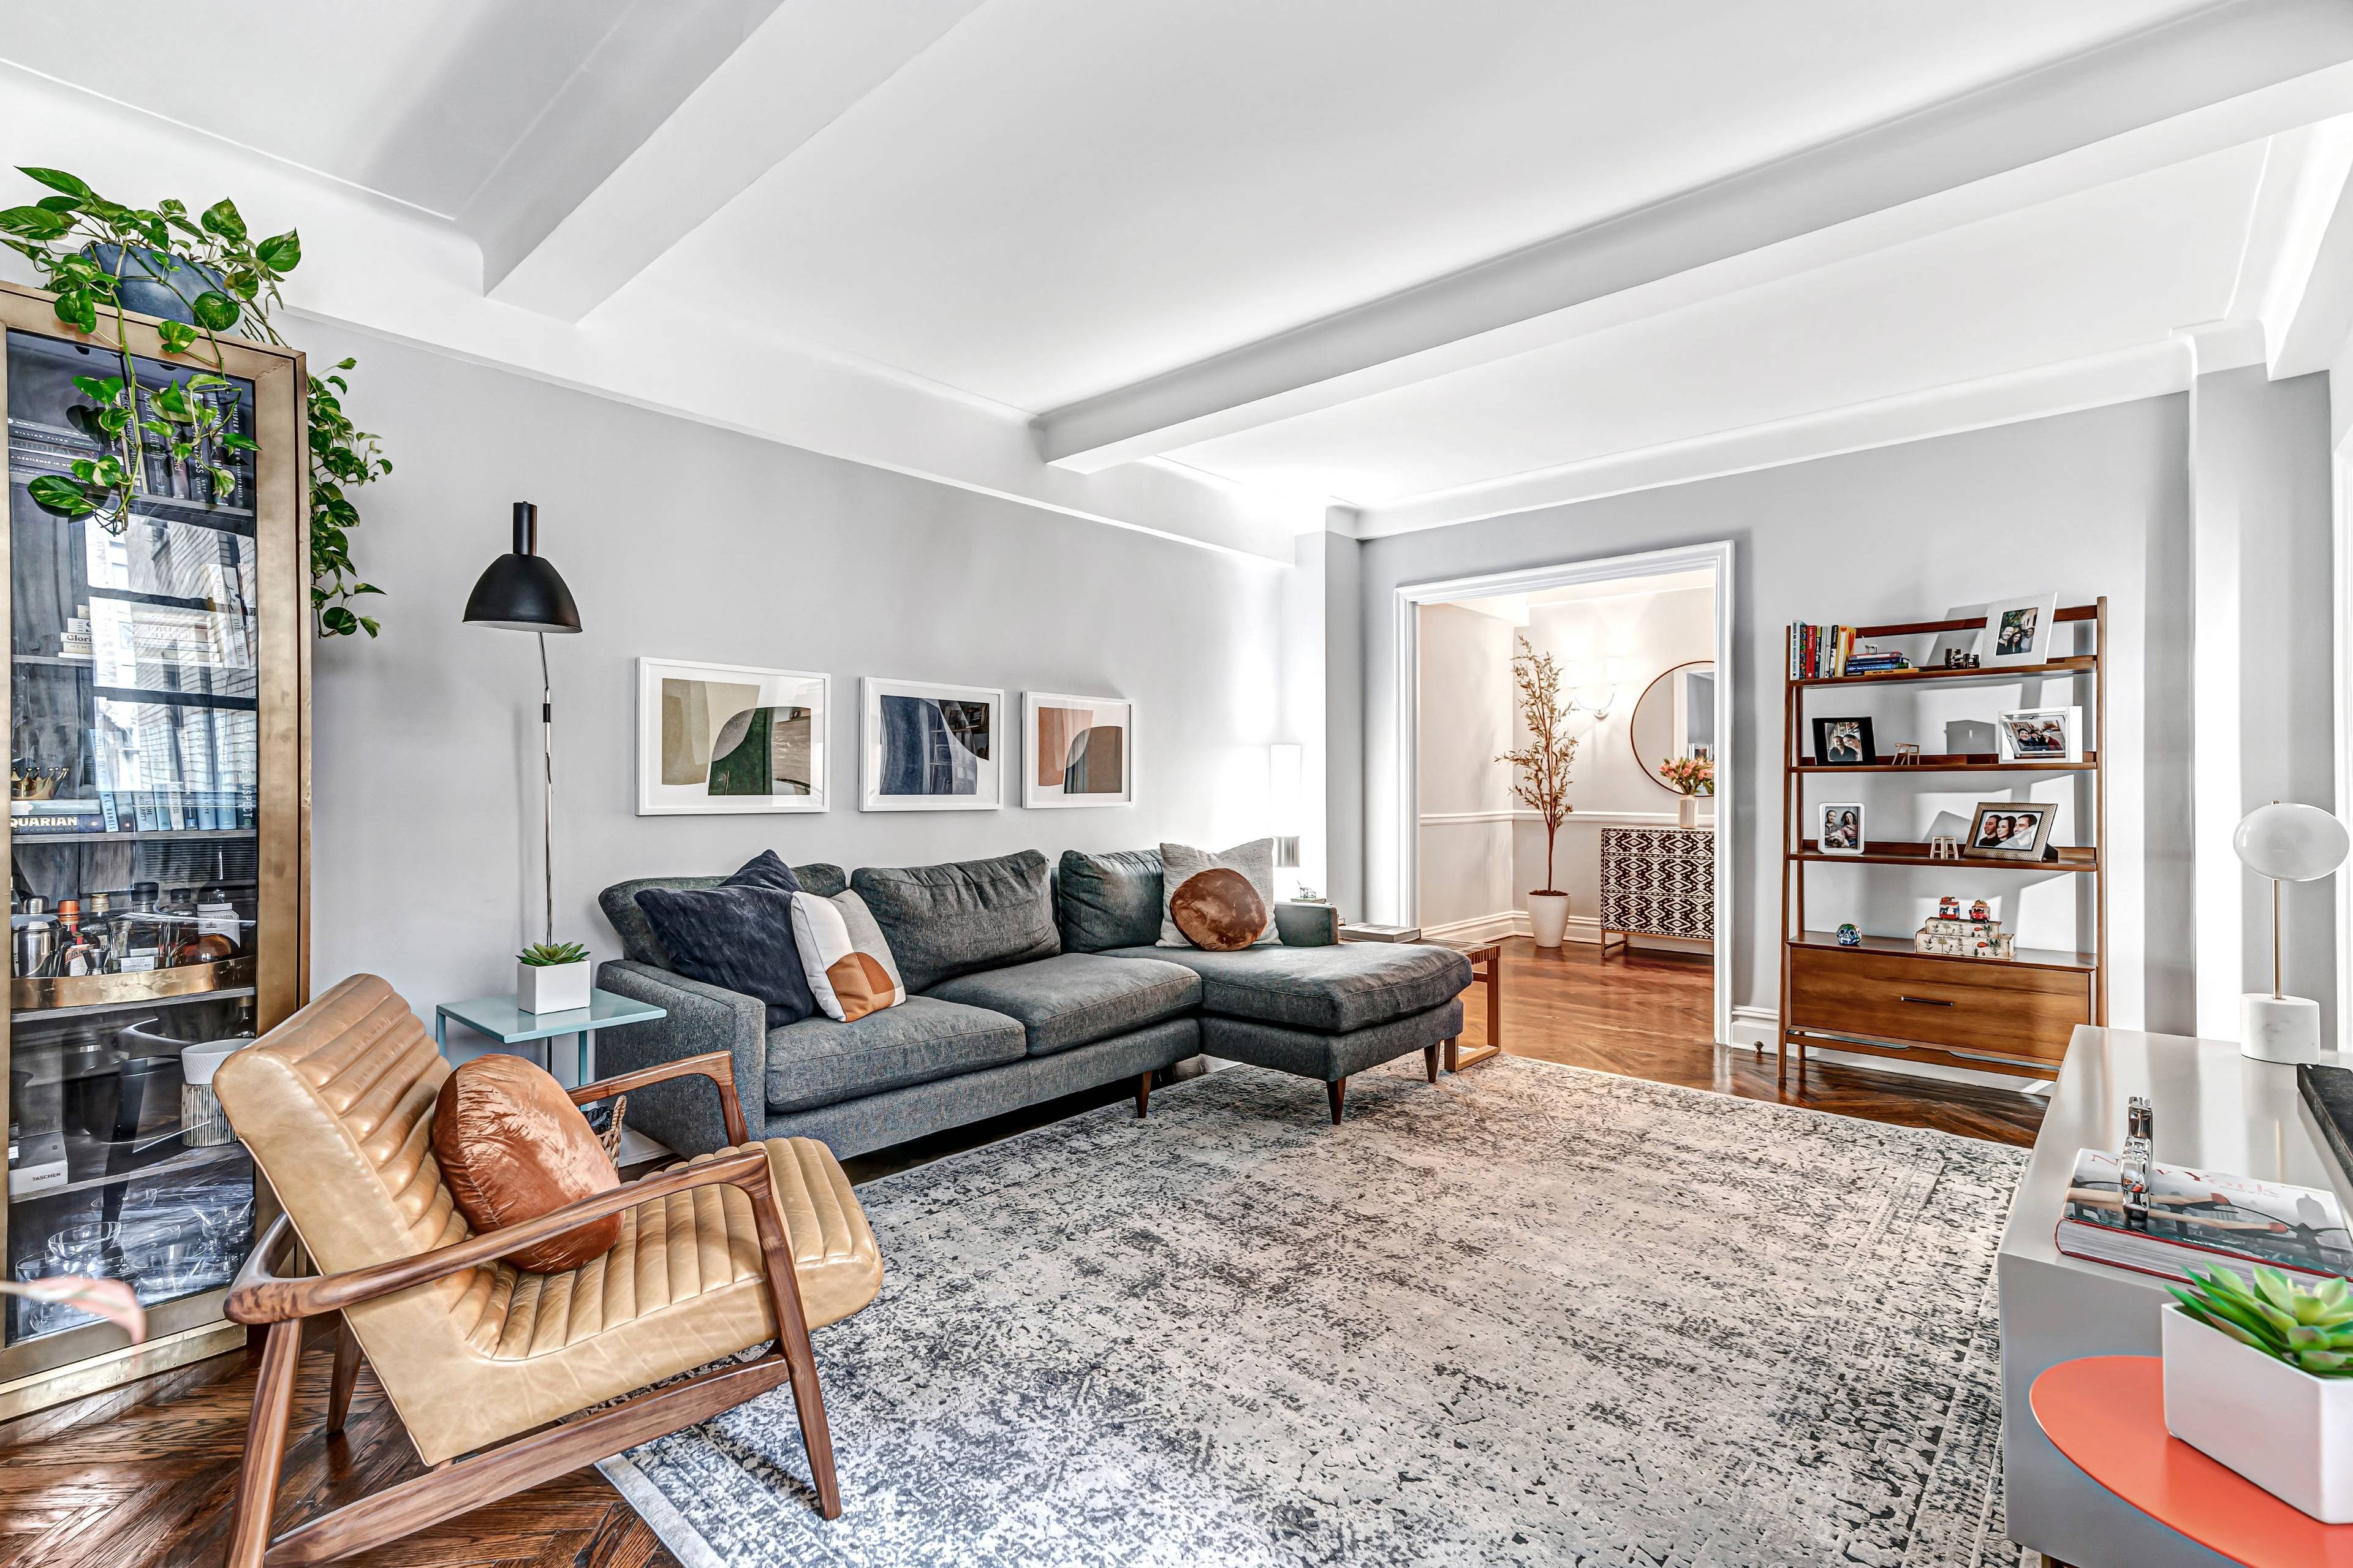 Move right into this pristine two bedroom, one and one half bathroom residence where a stylish renovation elevates classic prewar details to cultivate an atmosphere of timeless sophistication.